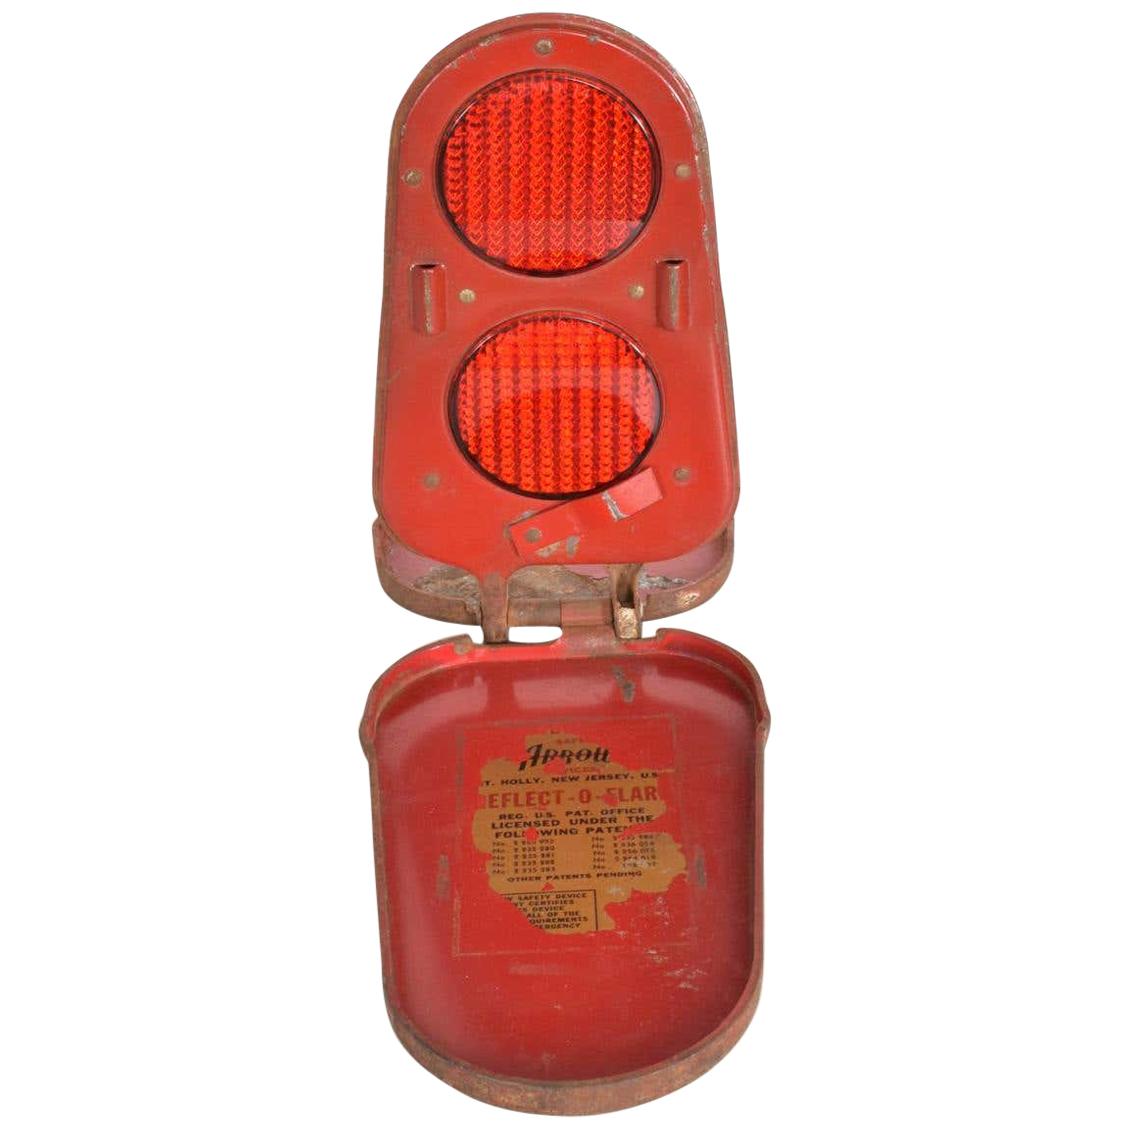 Red Arrow Reflect O Flare Light Compact Road Hazard Vintage Safety